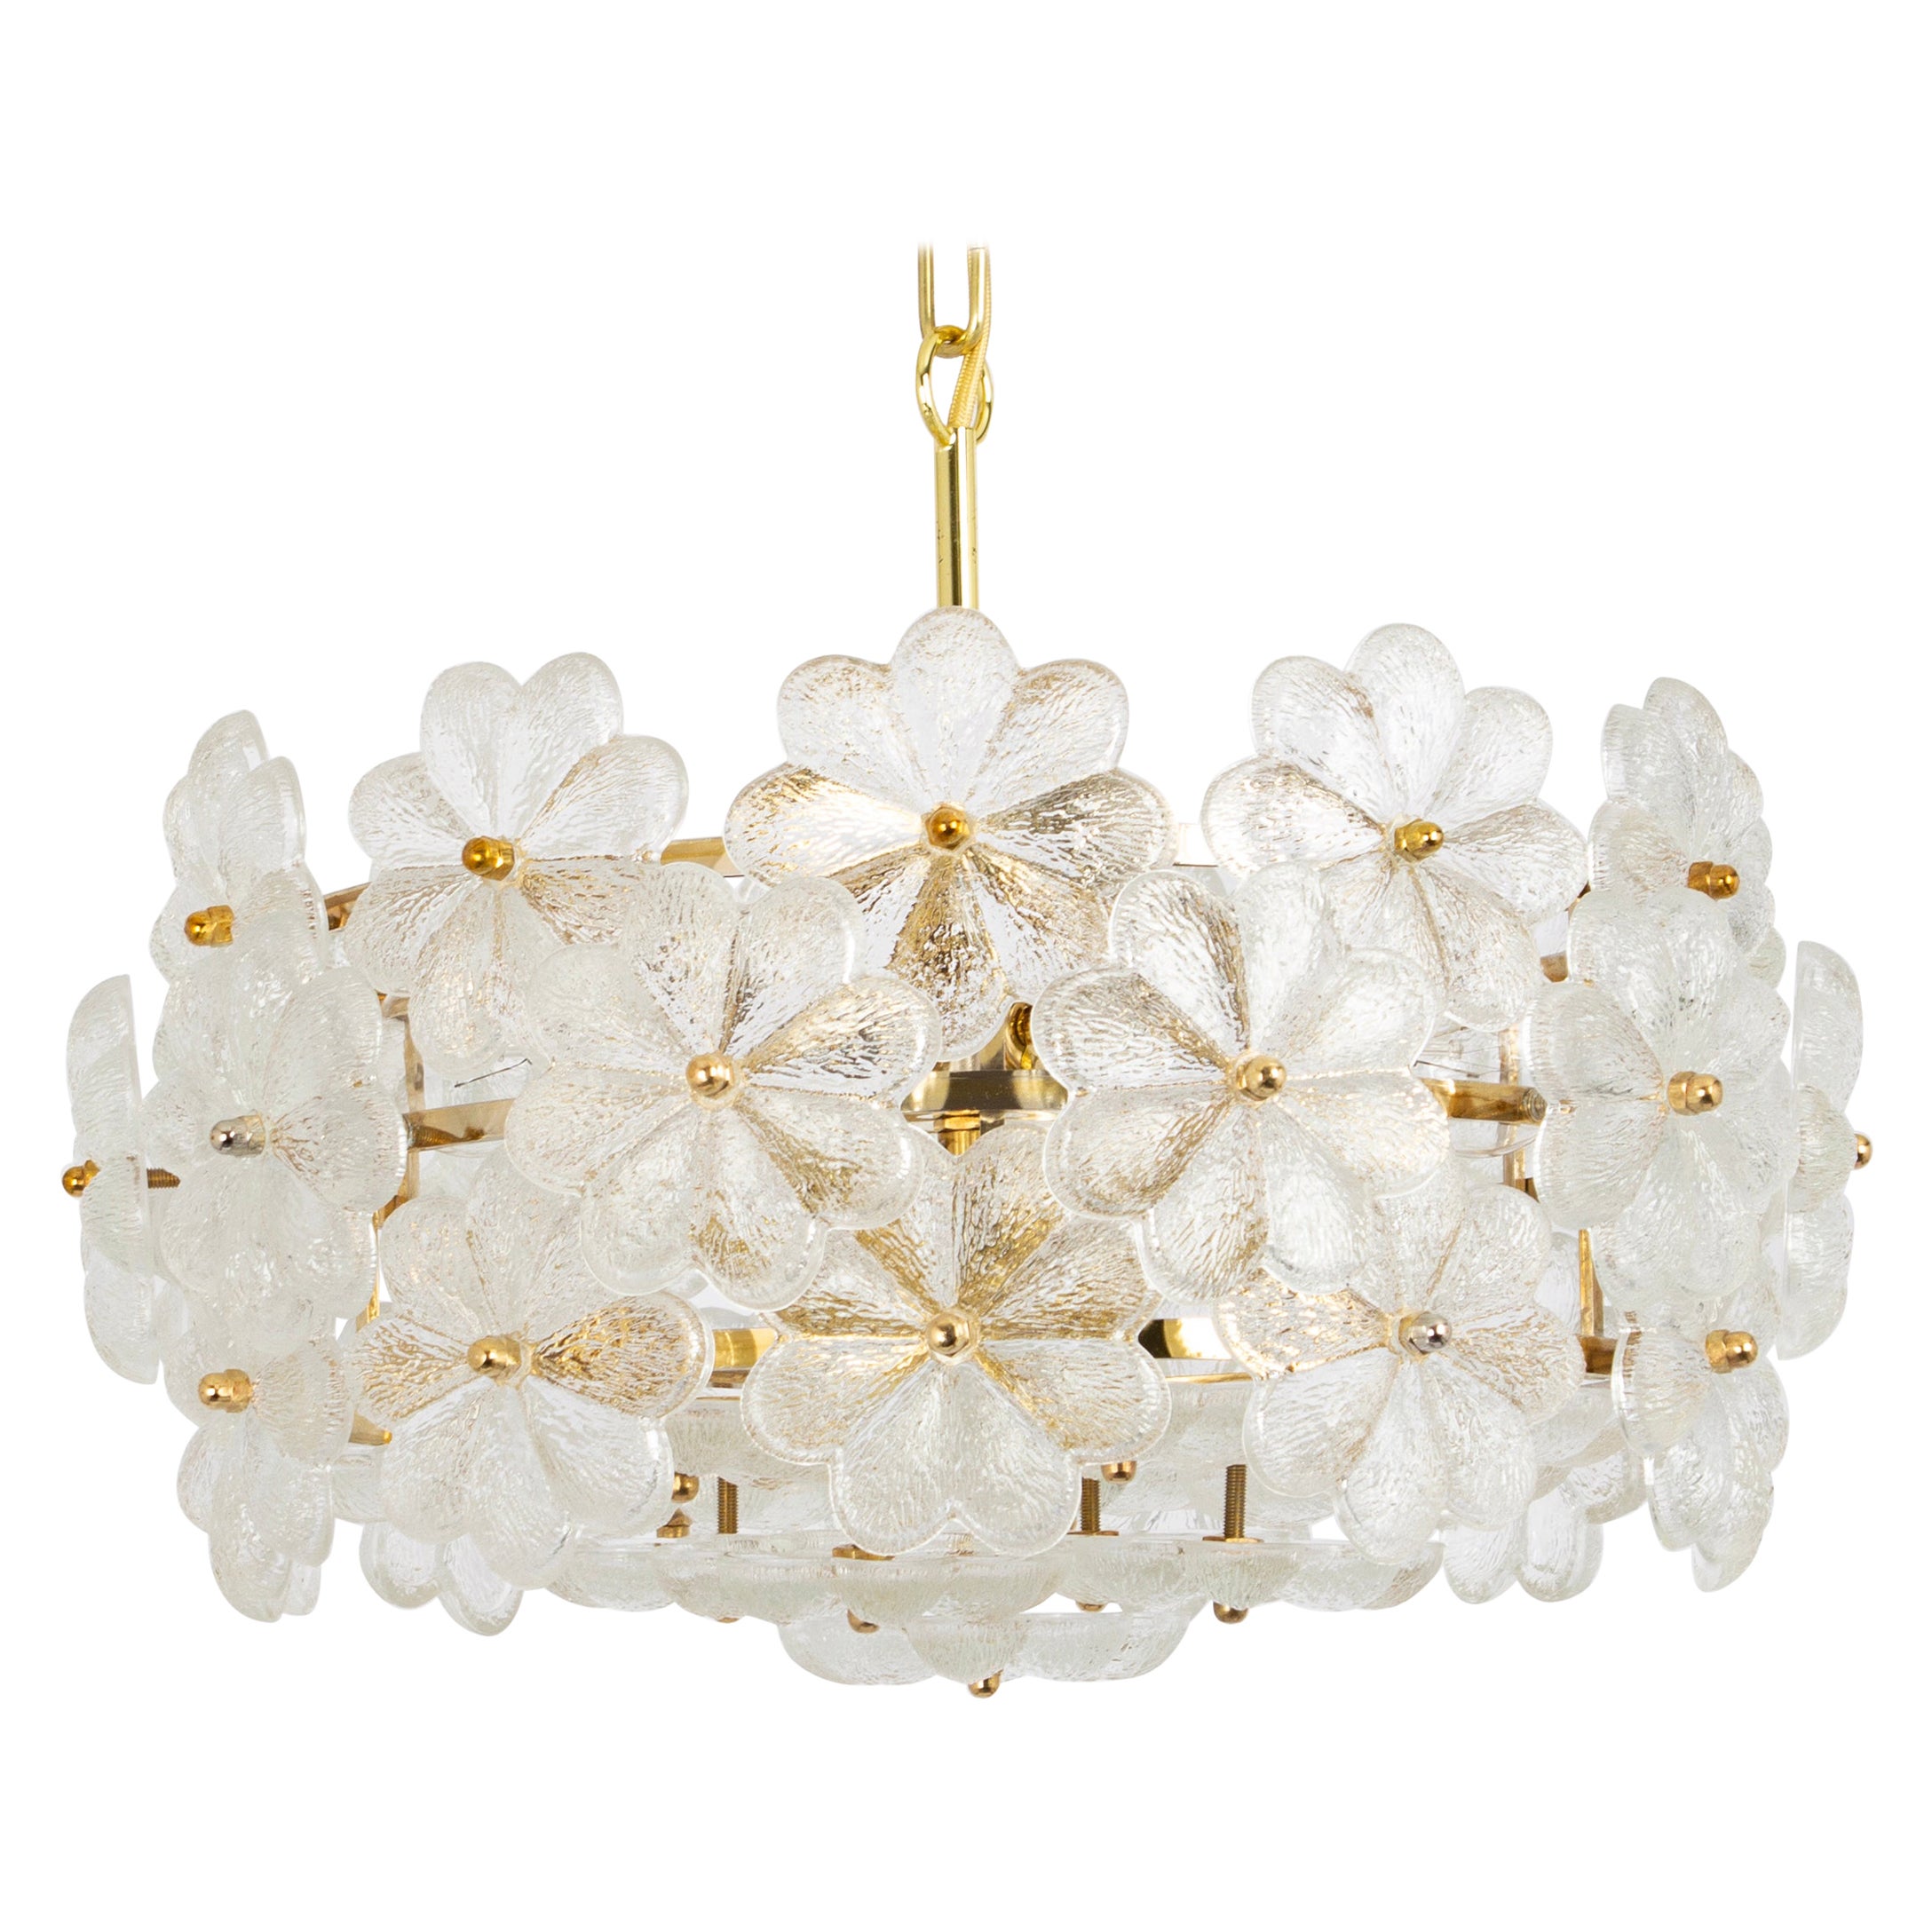 1 of 2 Stunning Petite Murano Glass Chandelier by Ernst Palme, Germany, 1970s